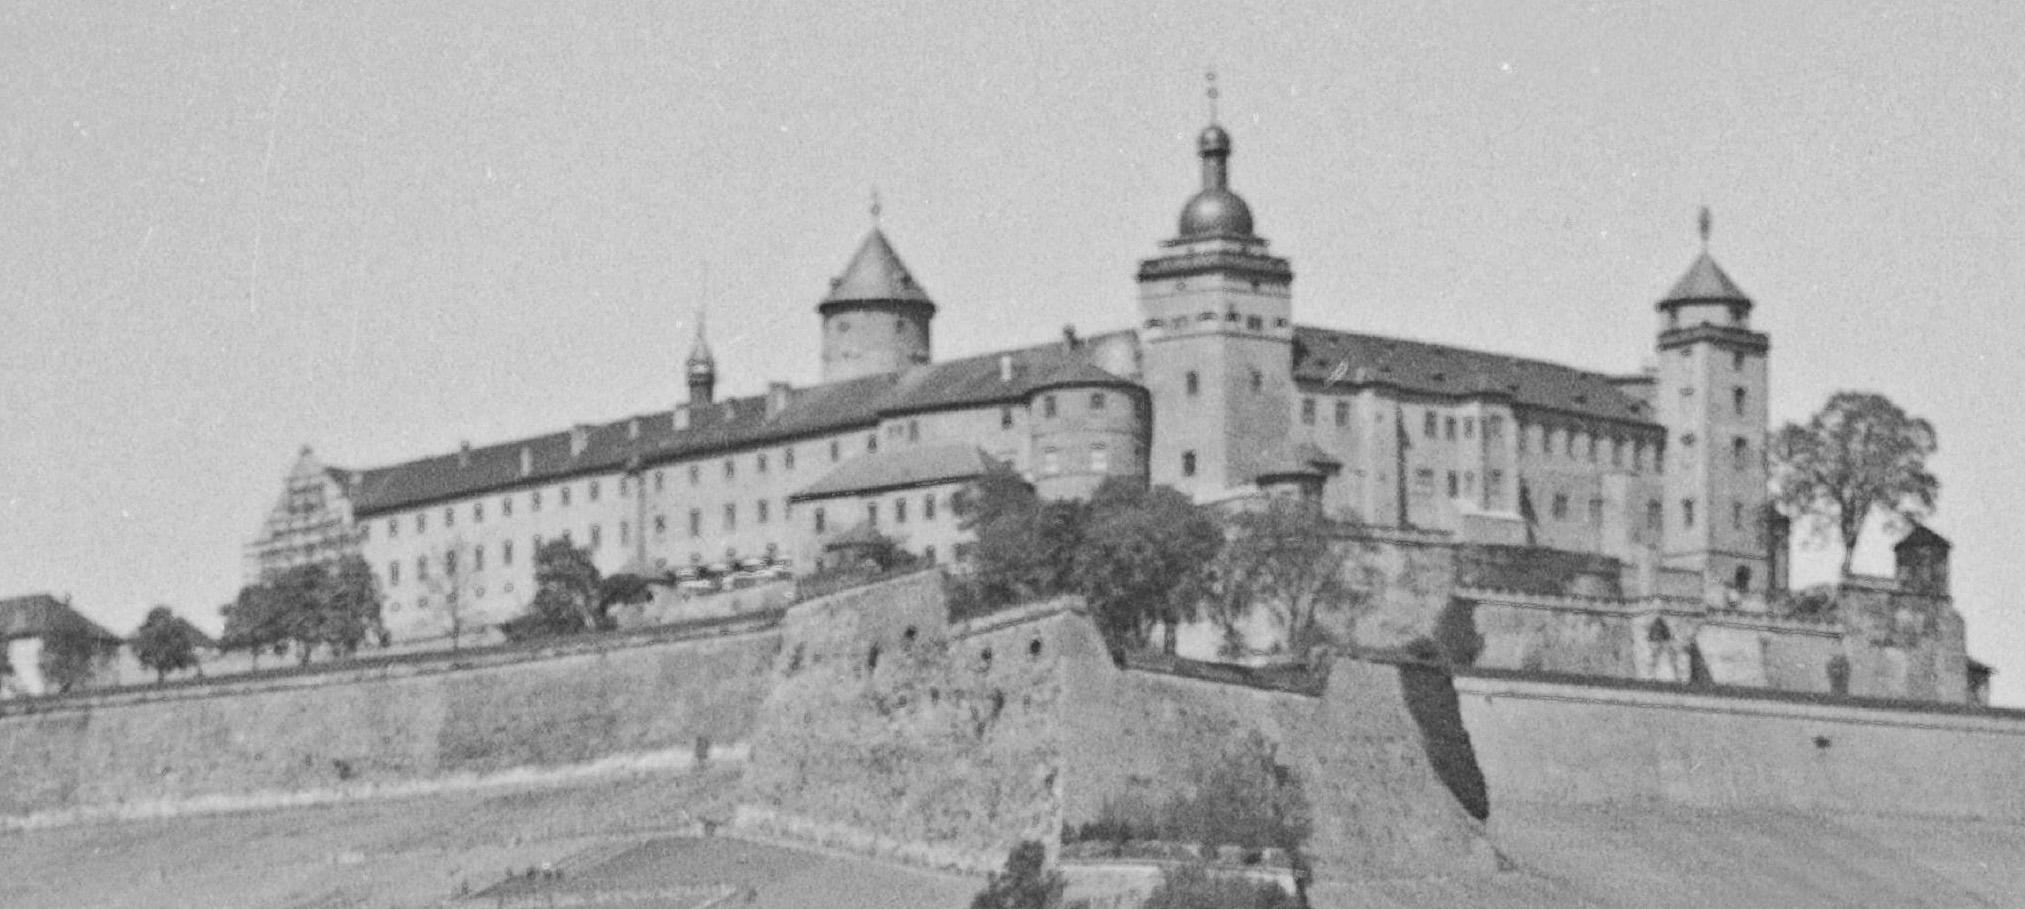 Würzburg, Germany 1935, Printed Later - Gray Black and White Photograph by Karl Heinrich Lämmel